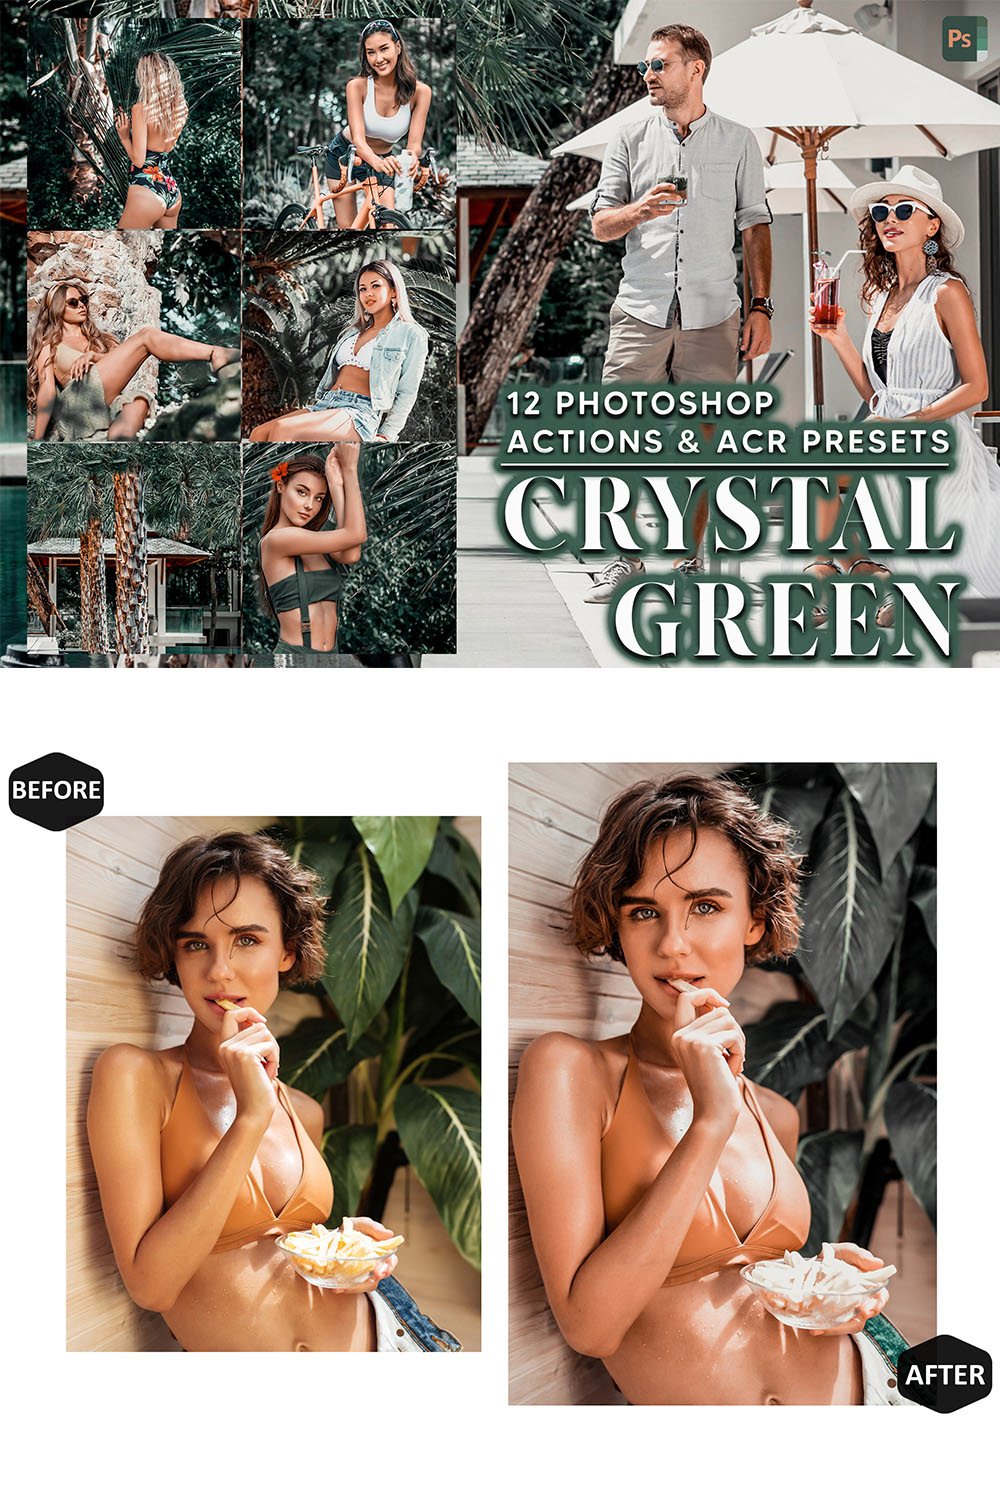 12 Photoshop Actions, Crystal Green Ps Action, Summer ACR Preset, Tropical Ps Filter, Atn Portrait And Lifestyle Theme For Instagram, Blogger pinterest preview image.